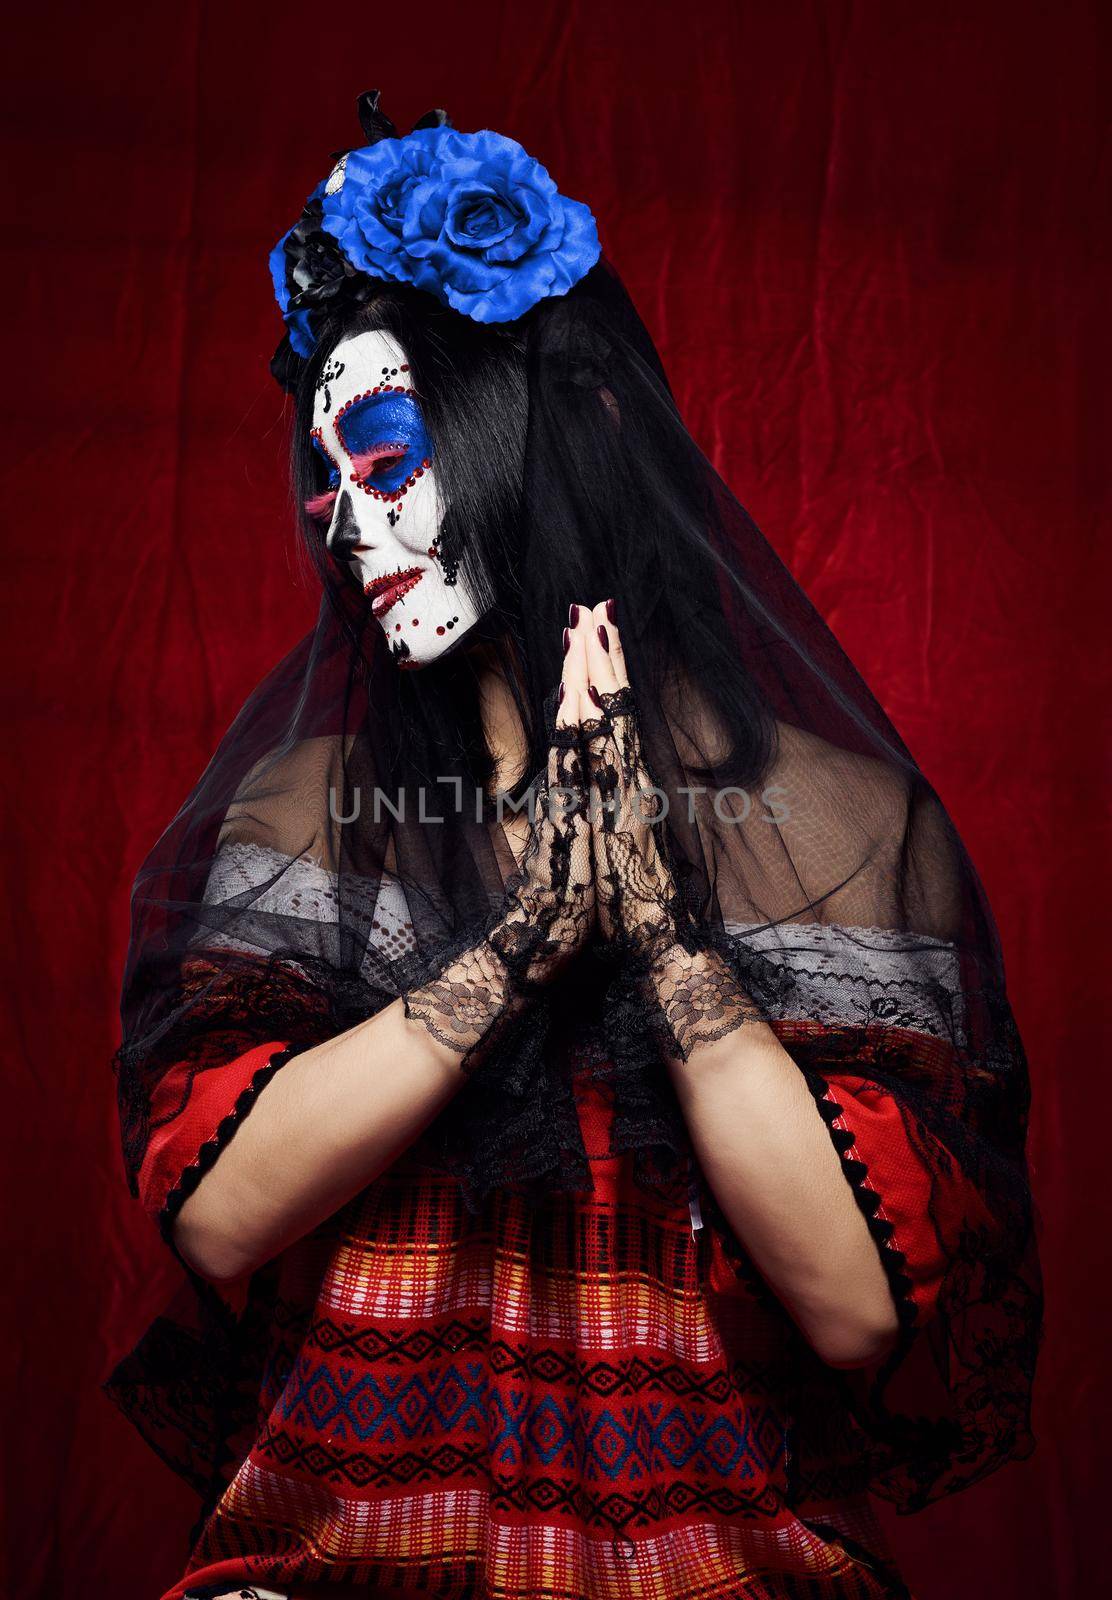 beautiful woman with a sugar skull makeup with a wreath of flowers on her head and a skull hands raised up in prayer pose in black gloves, red background by ndanko